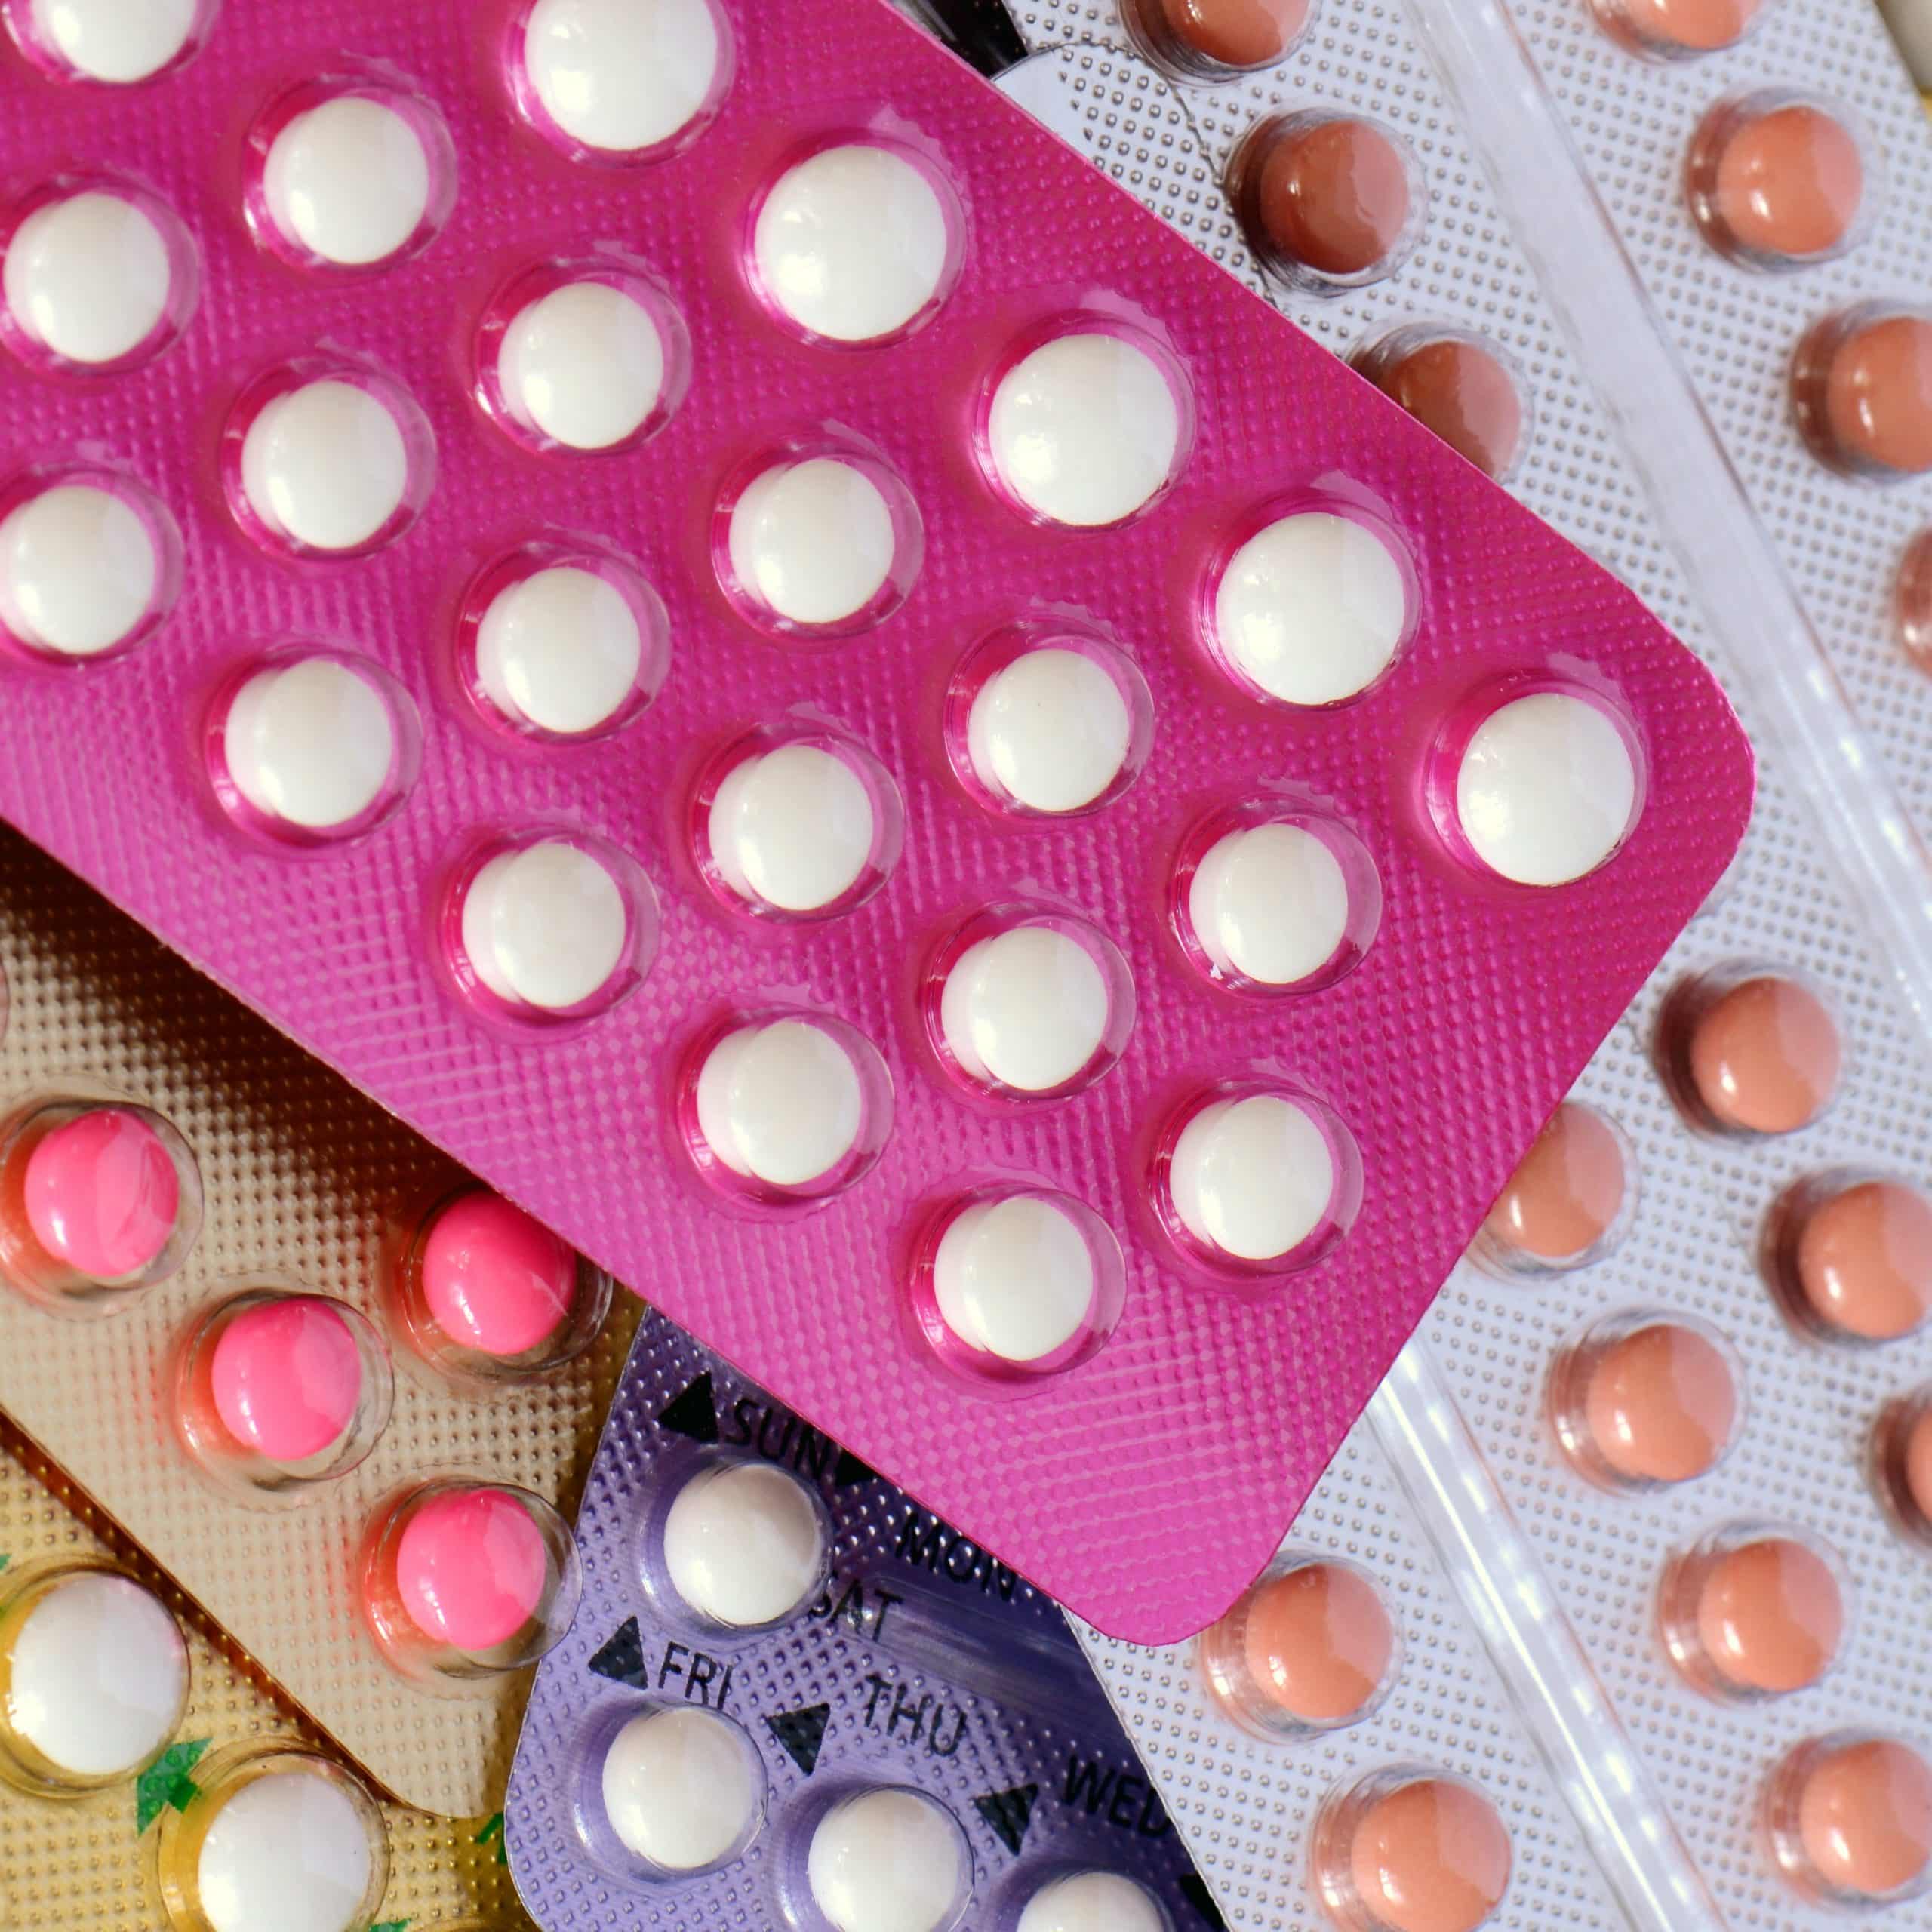 Birth Control Pill Risks: What To Do